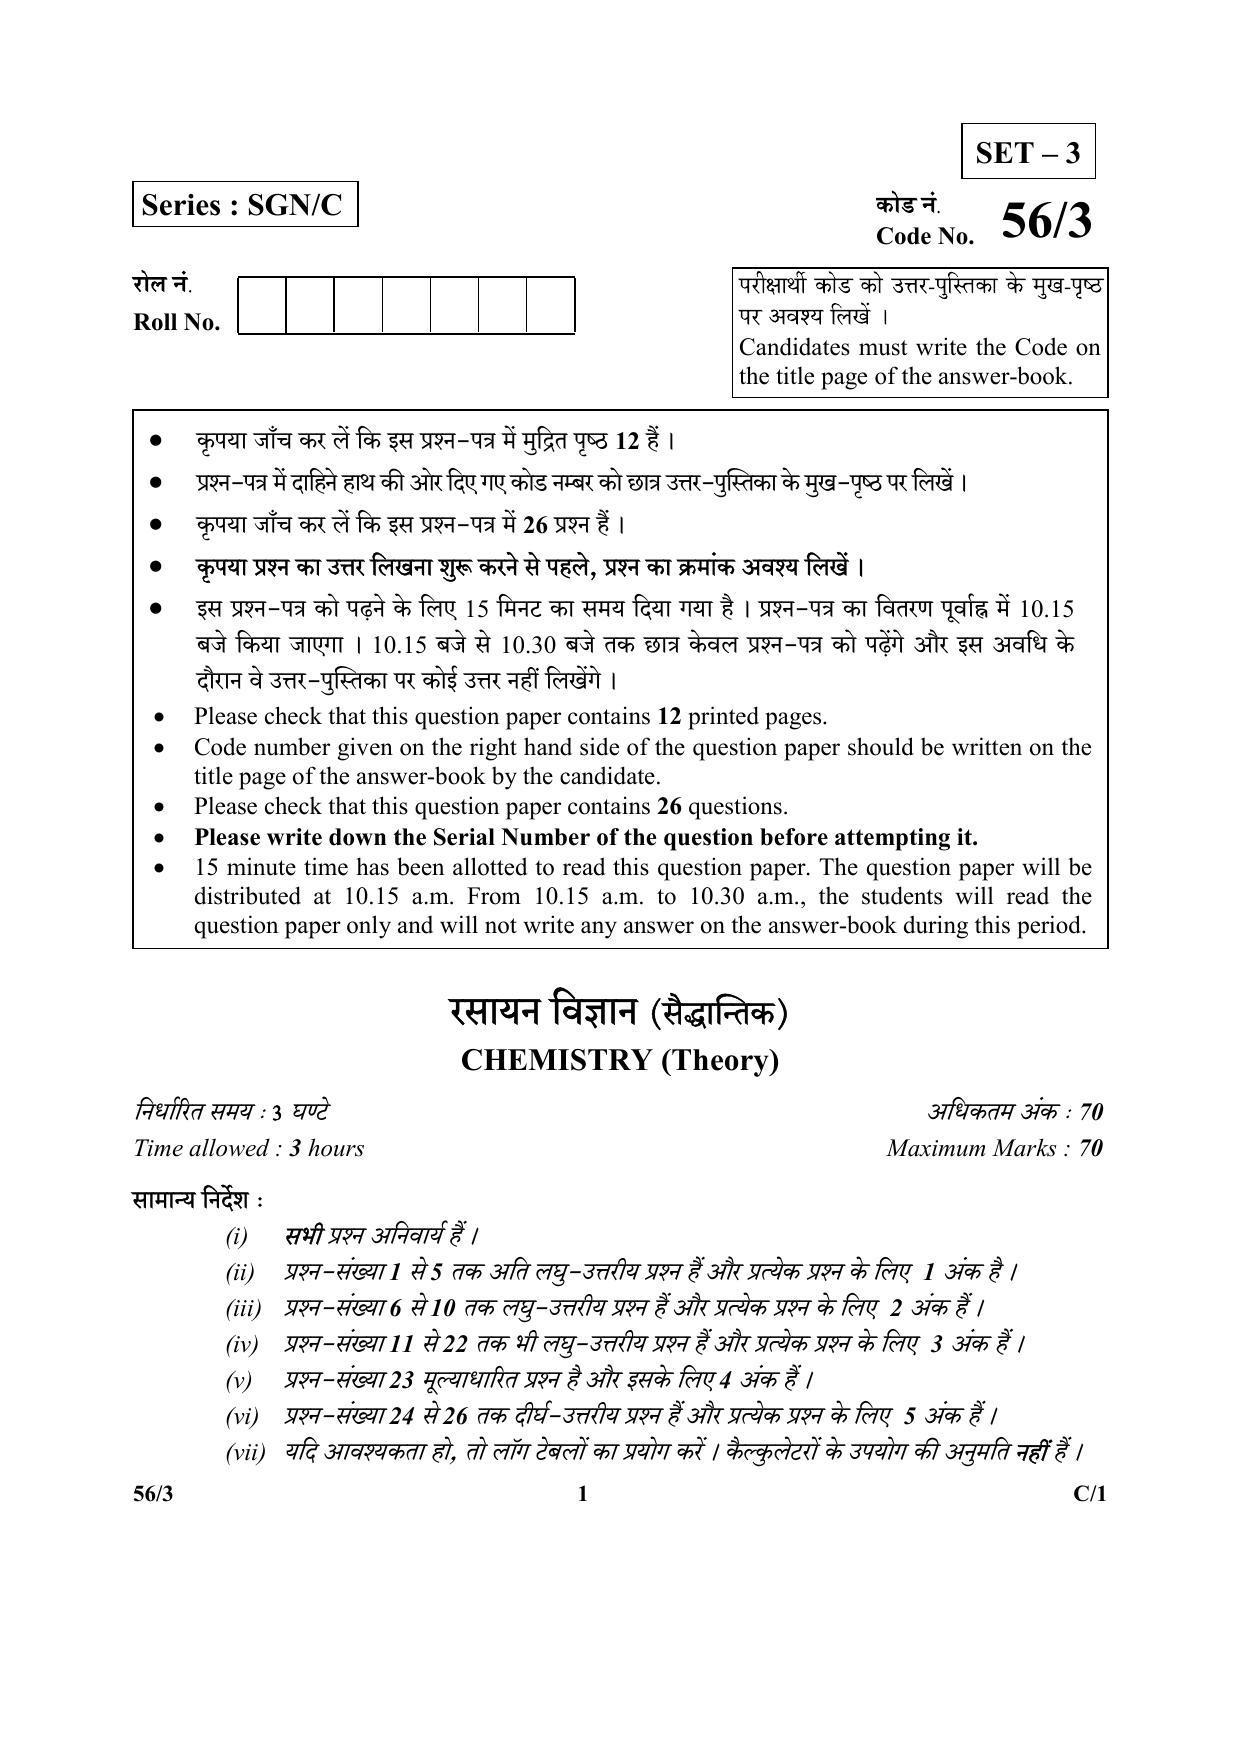 CBSE Class 12 56-3 (Chemistry) 2018 Compartment Question Paper - Page 1